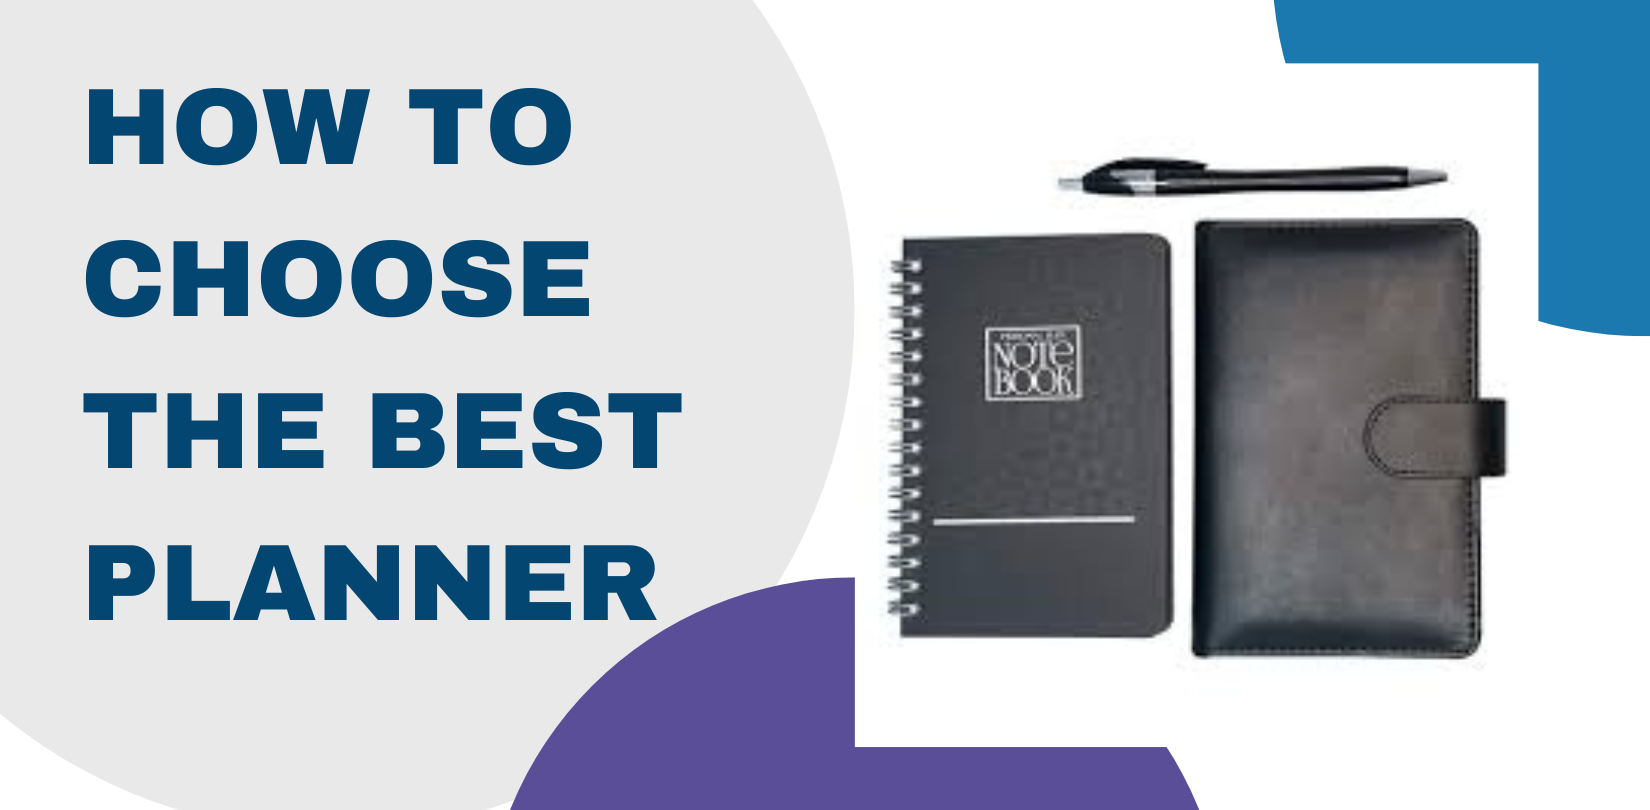 How to Choose the Best Planner